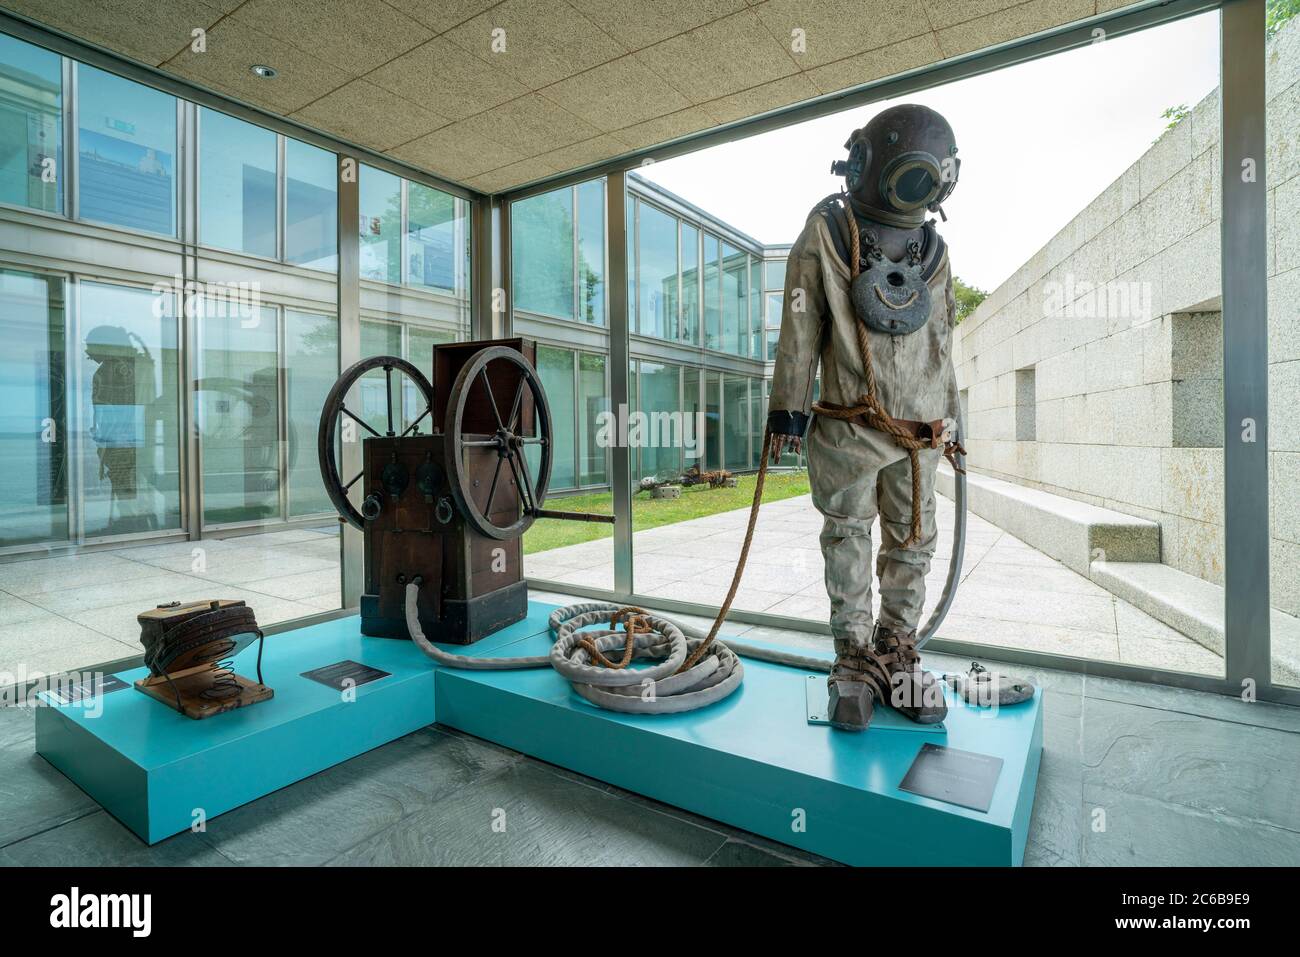 Old diving suit on display at the Museo do Mar de Galicia - sea maritime museum in VIgo, Galicia, Spain, Europe Stock Photo